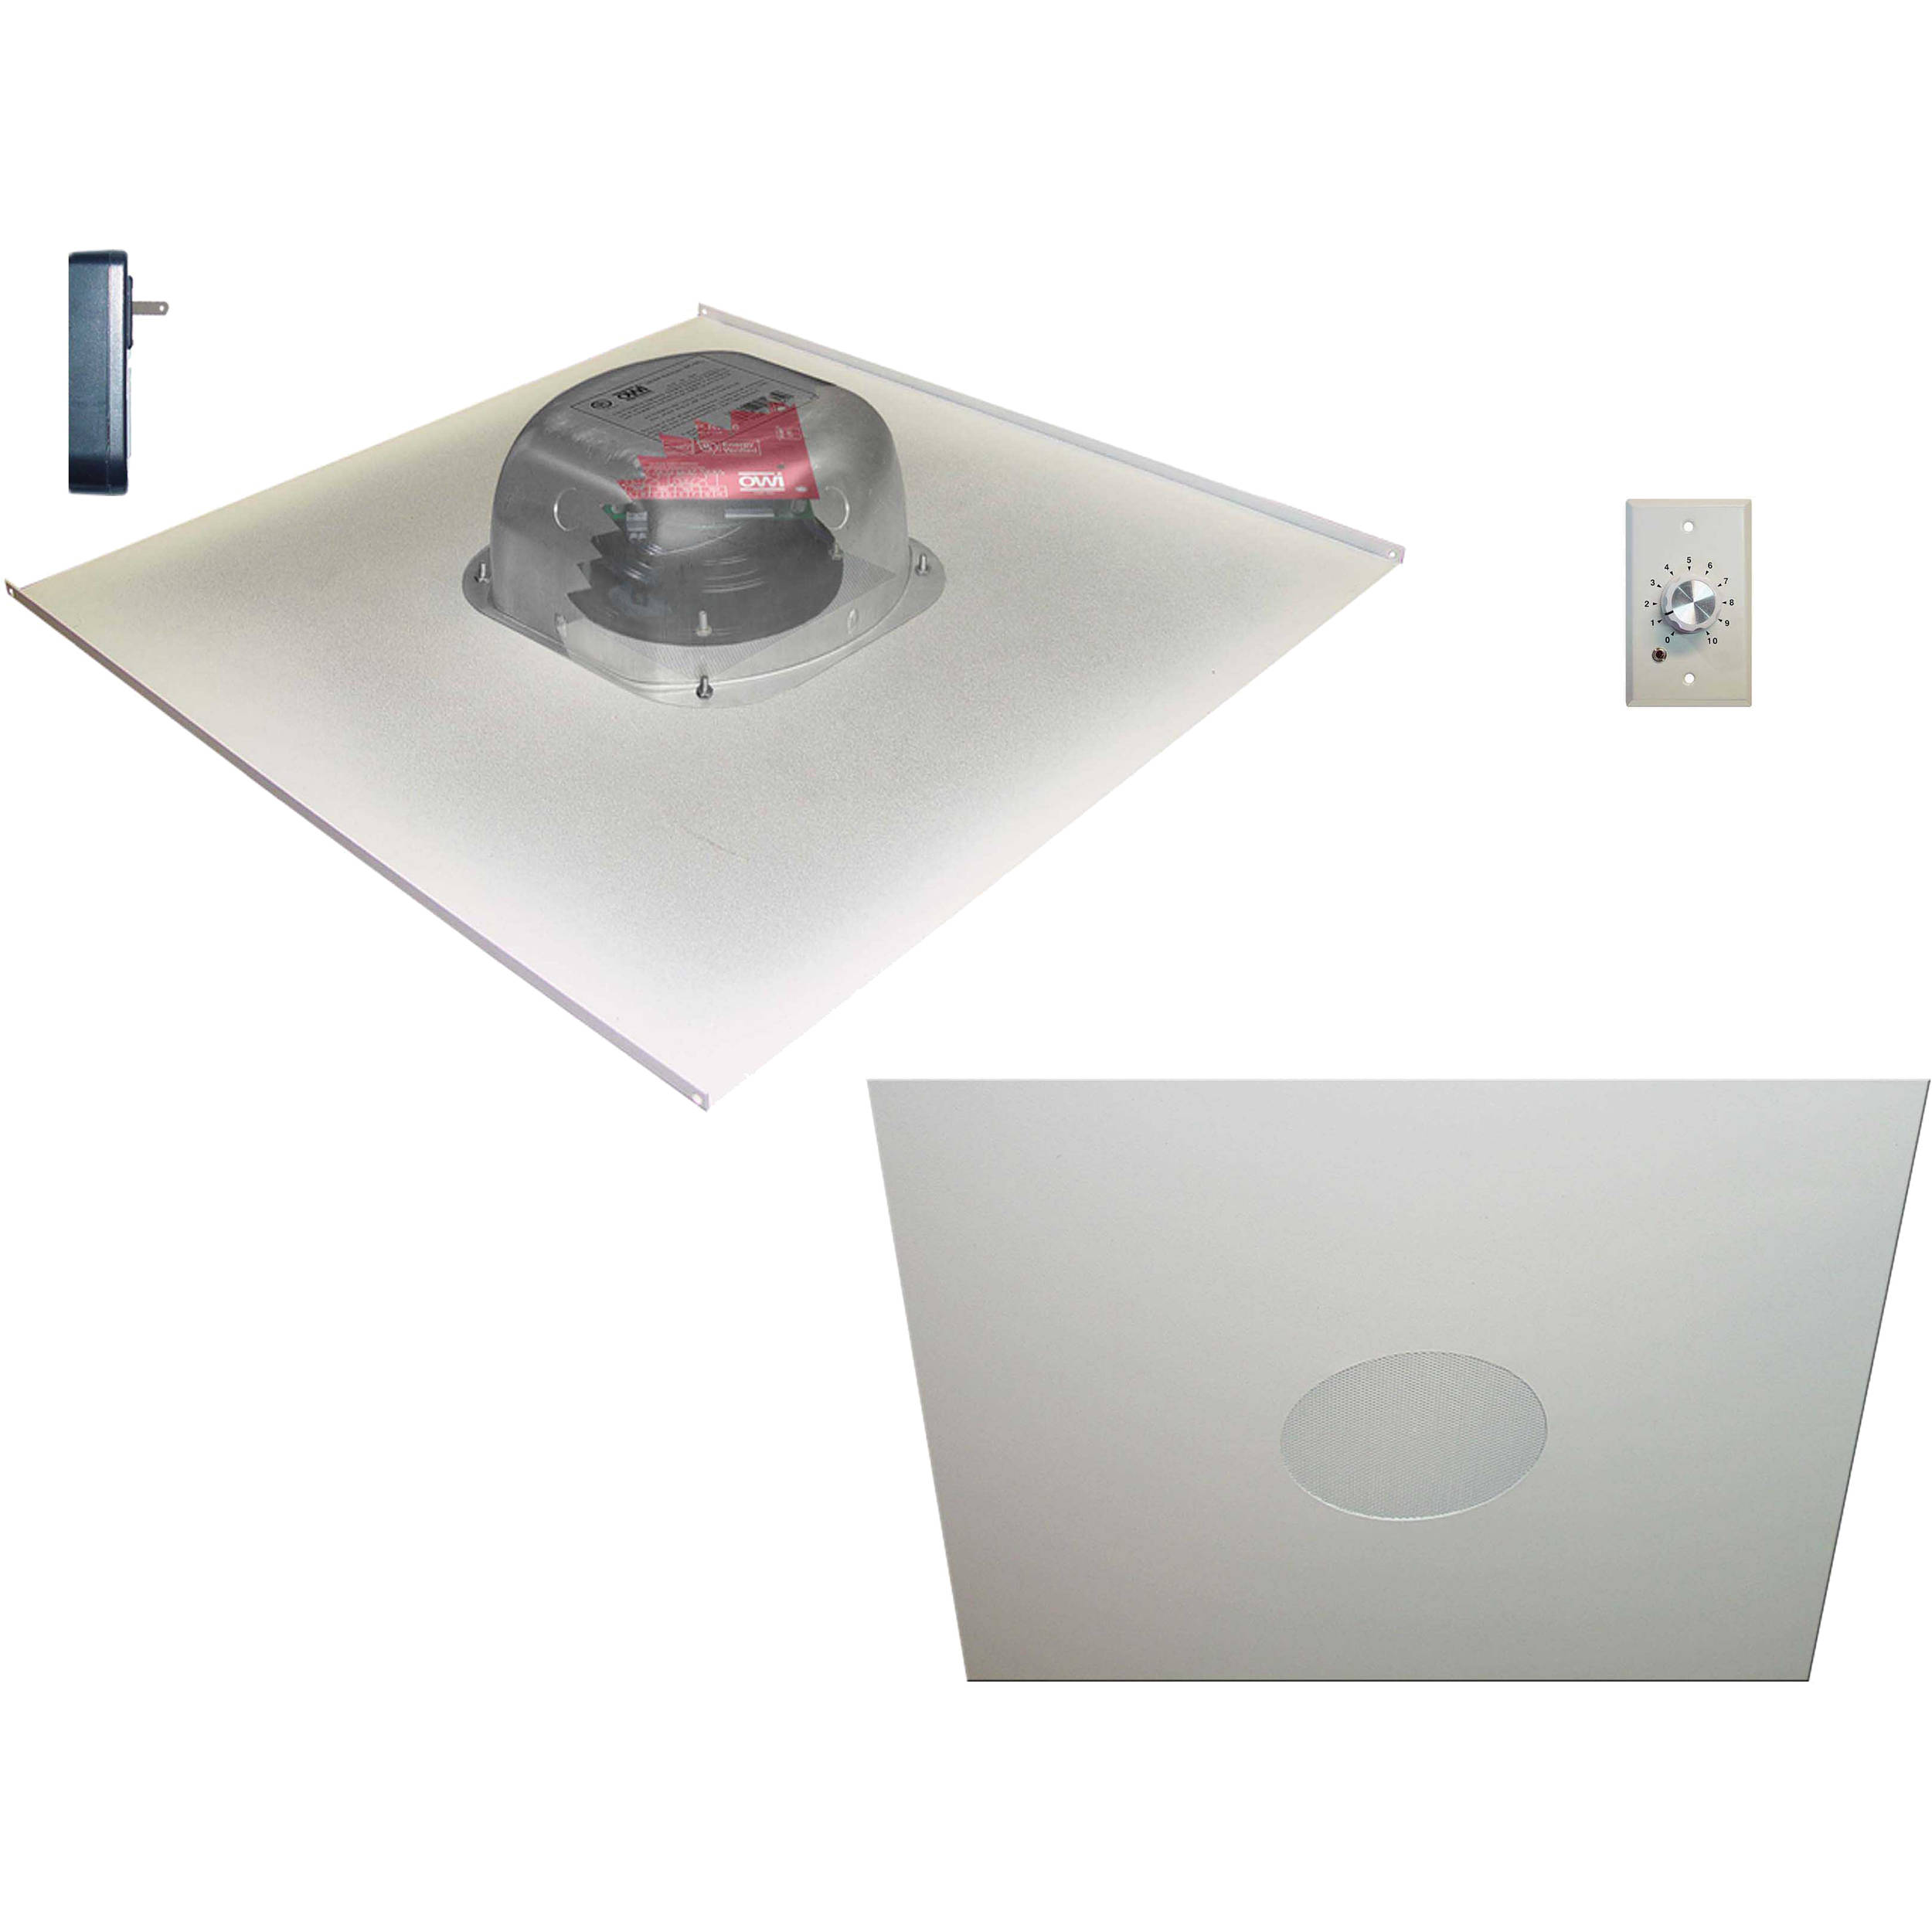 Owi Inc Two Source 6 5 Amplified Drop Ceiling Speaker On Tile With Volume Control 2 Speaker Package